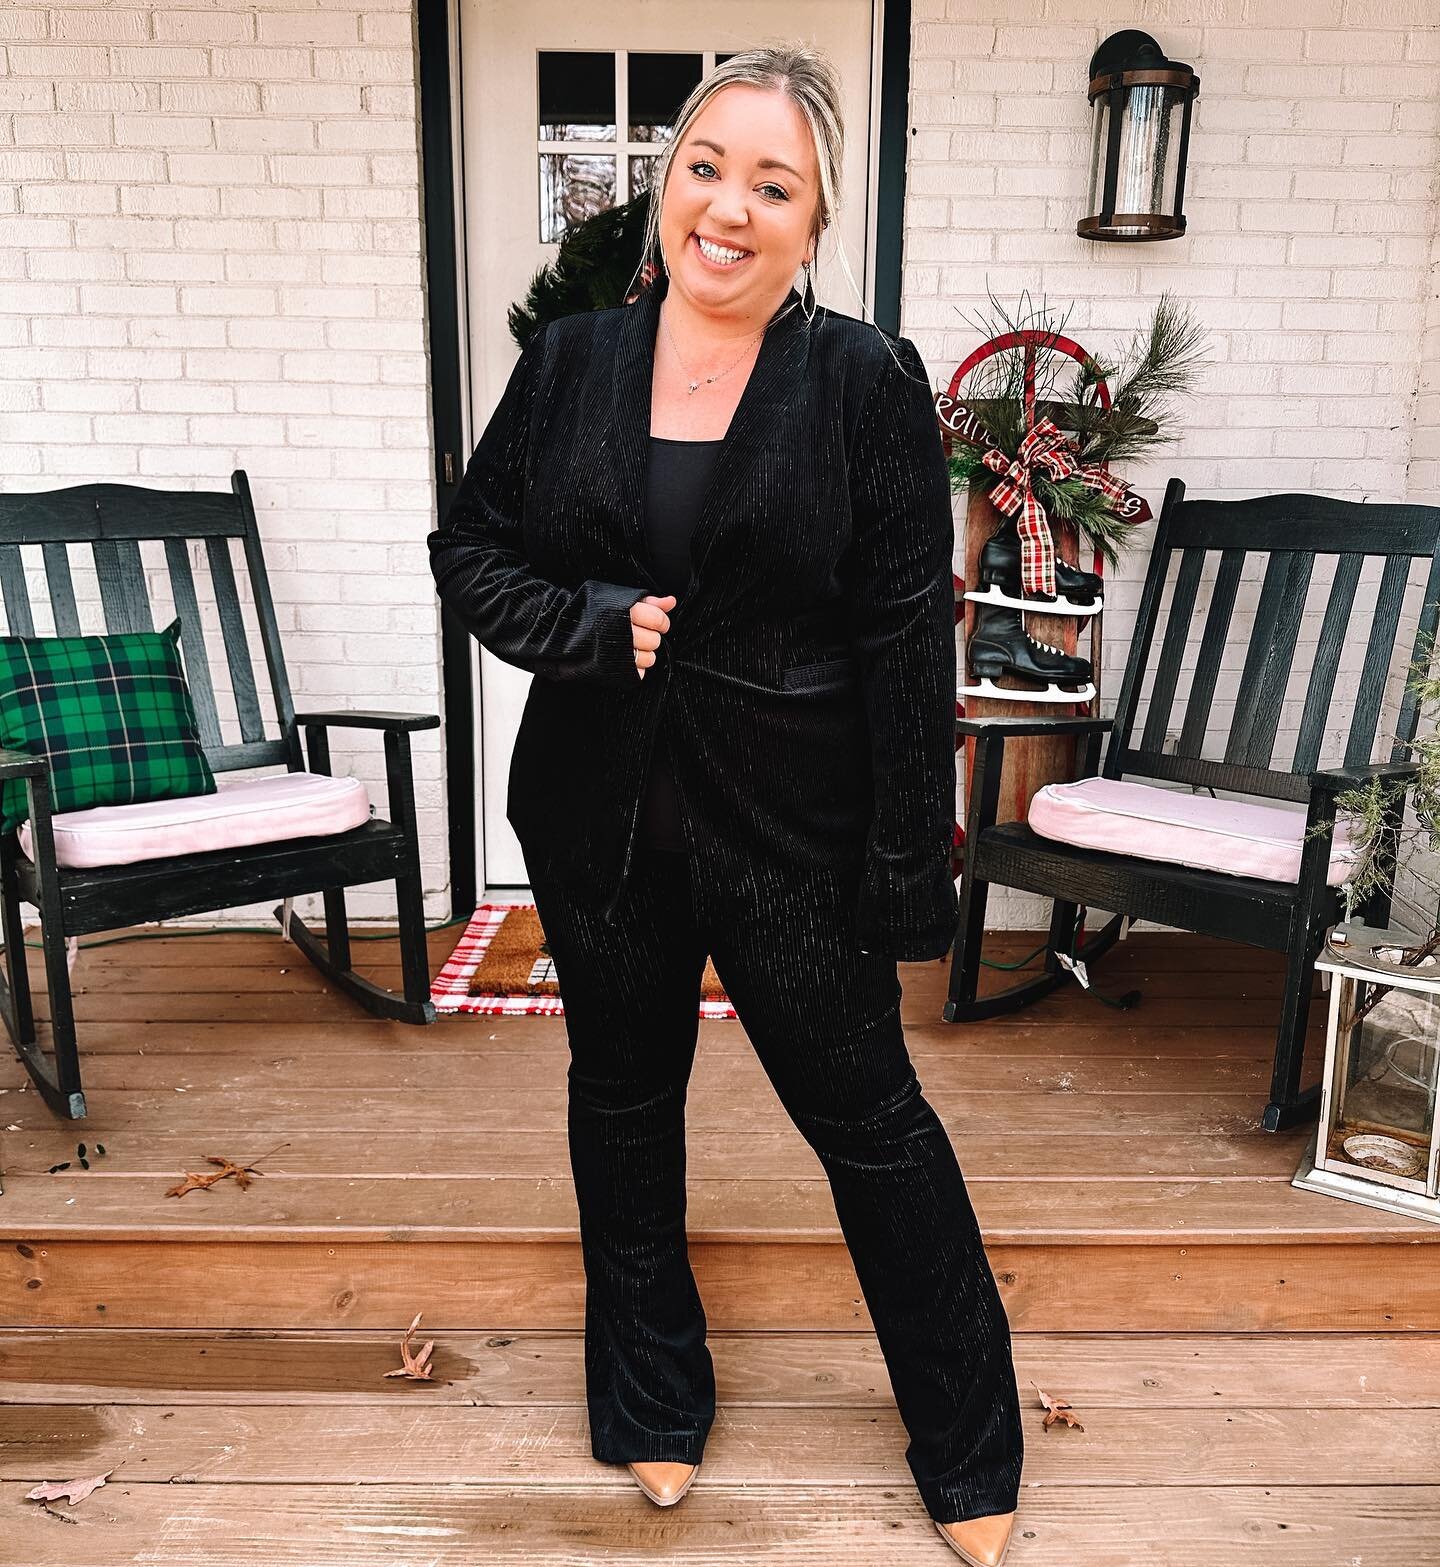 I&rsquo;ll be wearing this everyday from here on out! Love this beautiful @walmartfashion velour blazer and flares so much! You will be the best dressed at your holiday parties! I also got this adorable plaid dress from @walmart that would be perfect